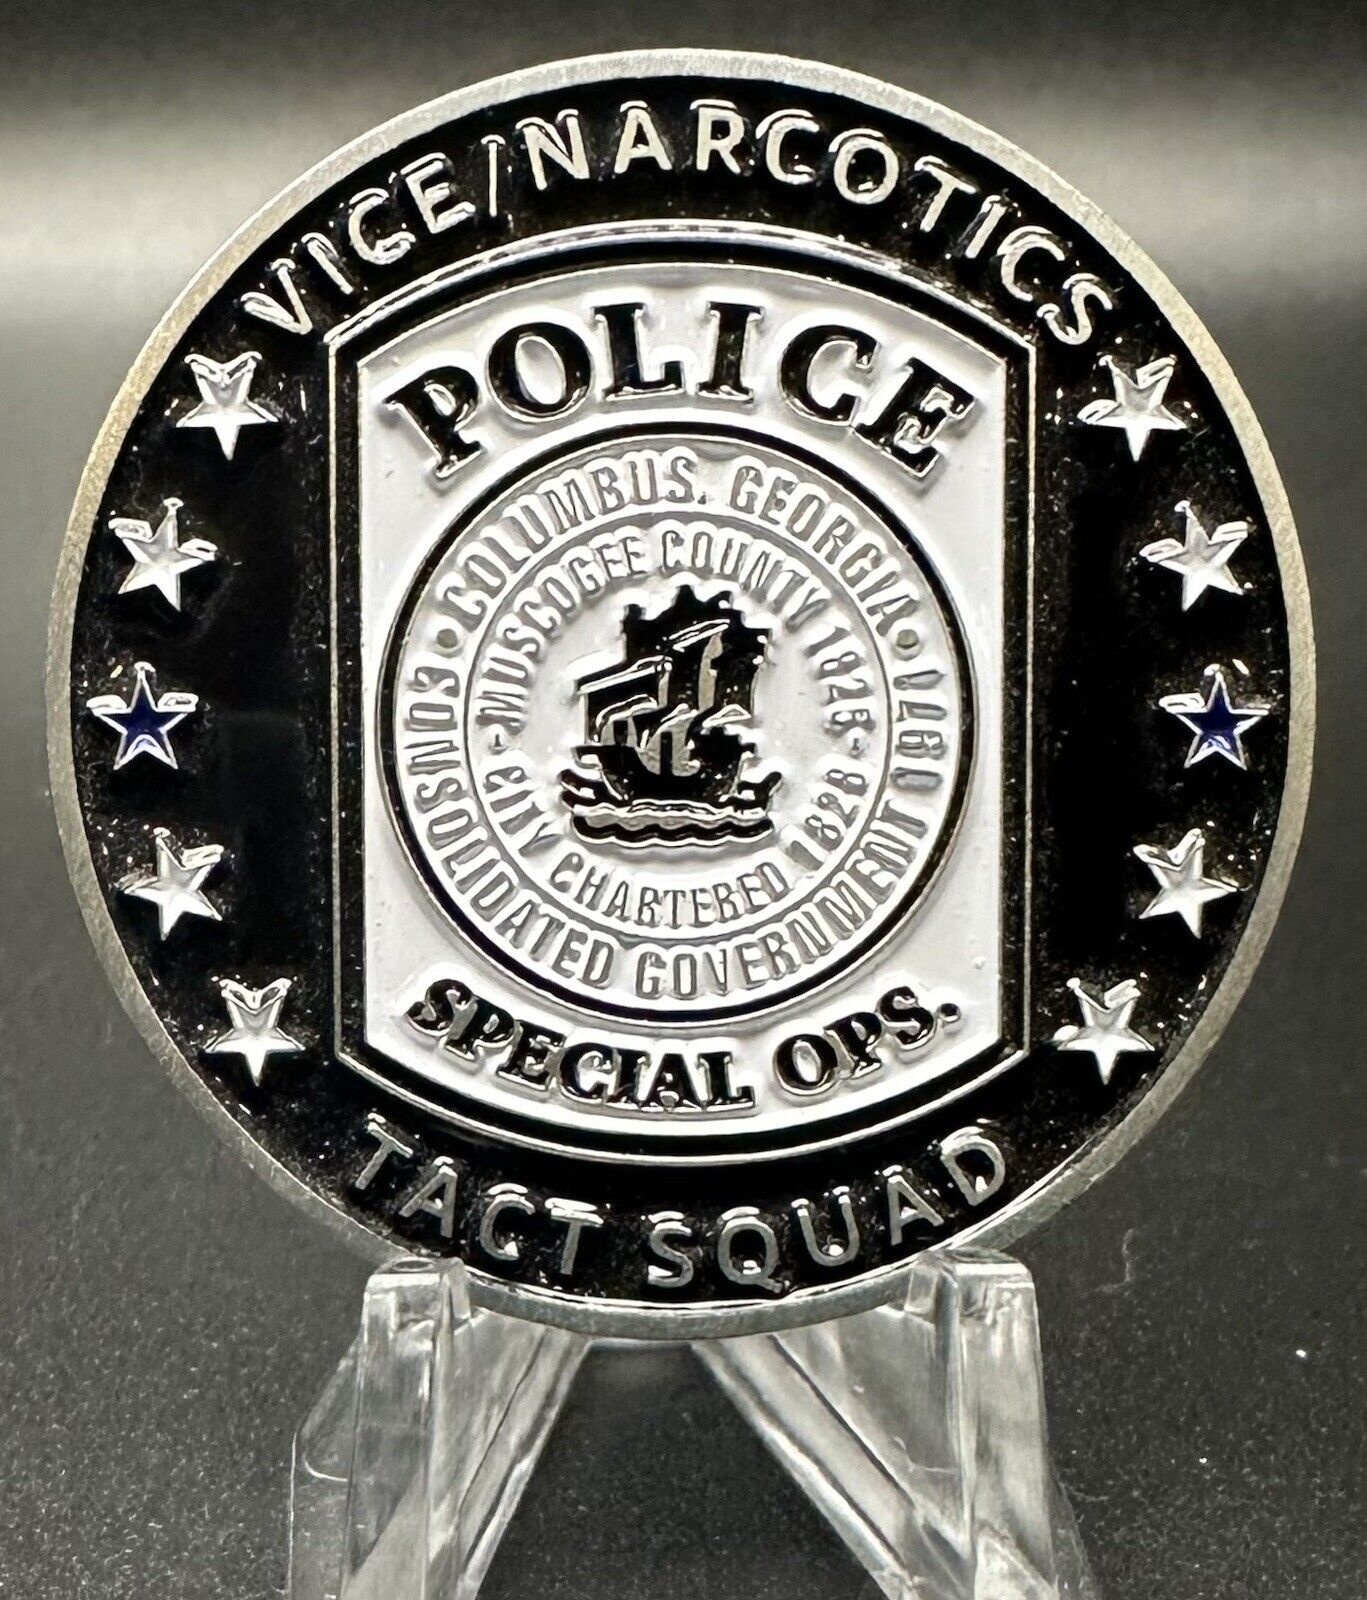 Columbus Police Georgia Vice/Narcotics Tact Squad Special Operations GA Coin